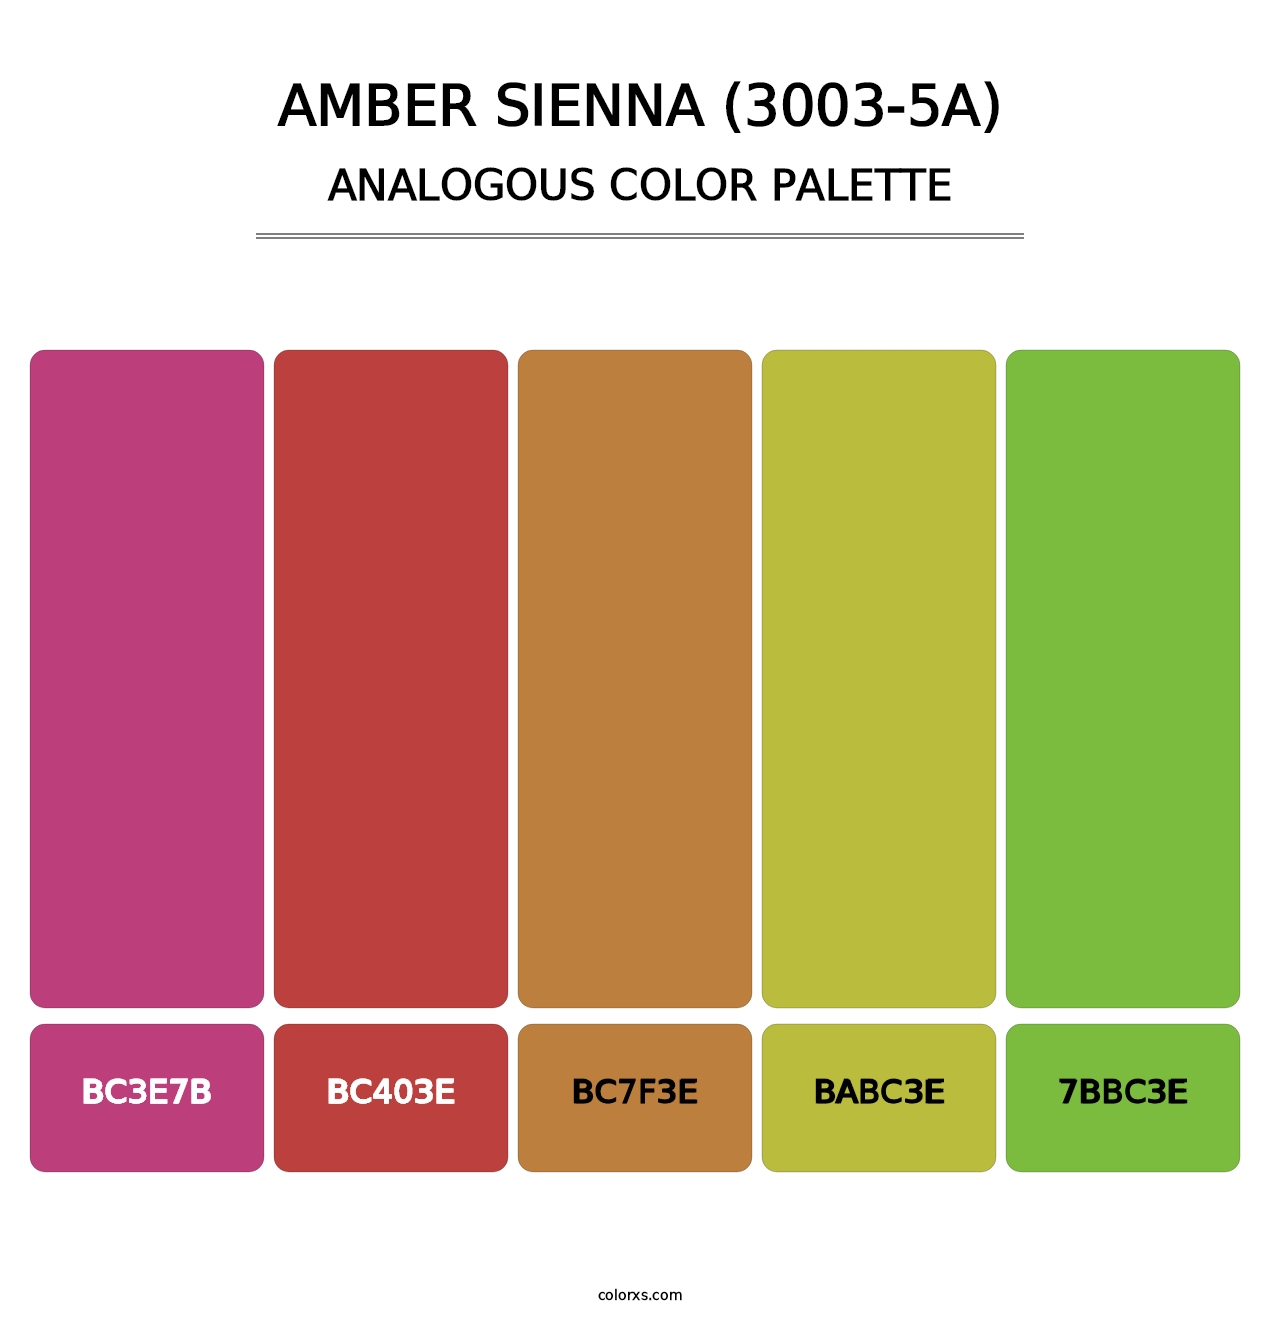 Amber Sienna (3003-5A) - Analogous Color Palette